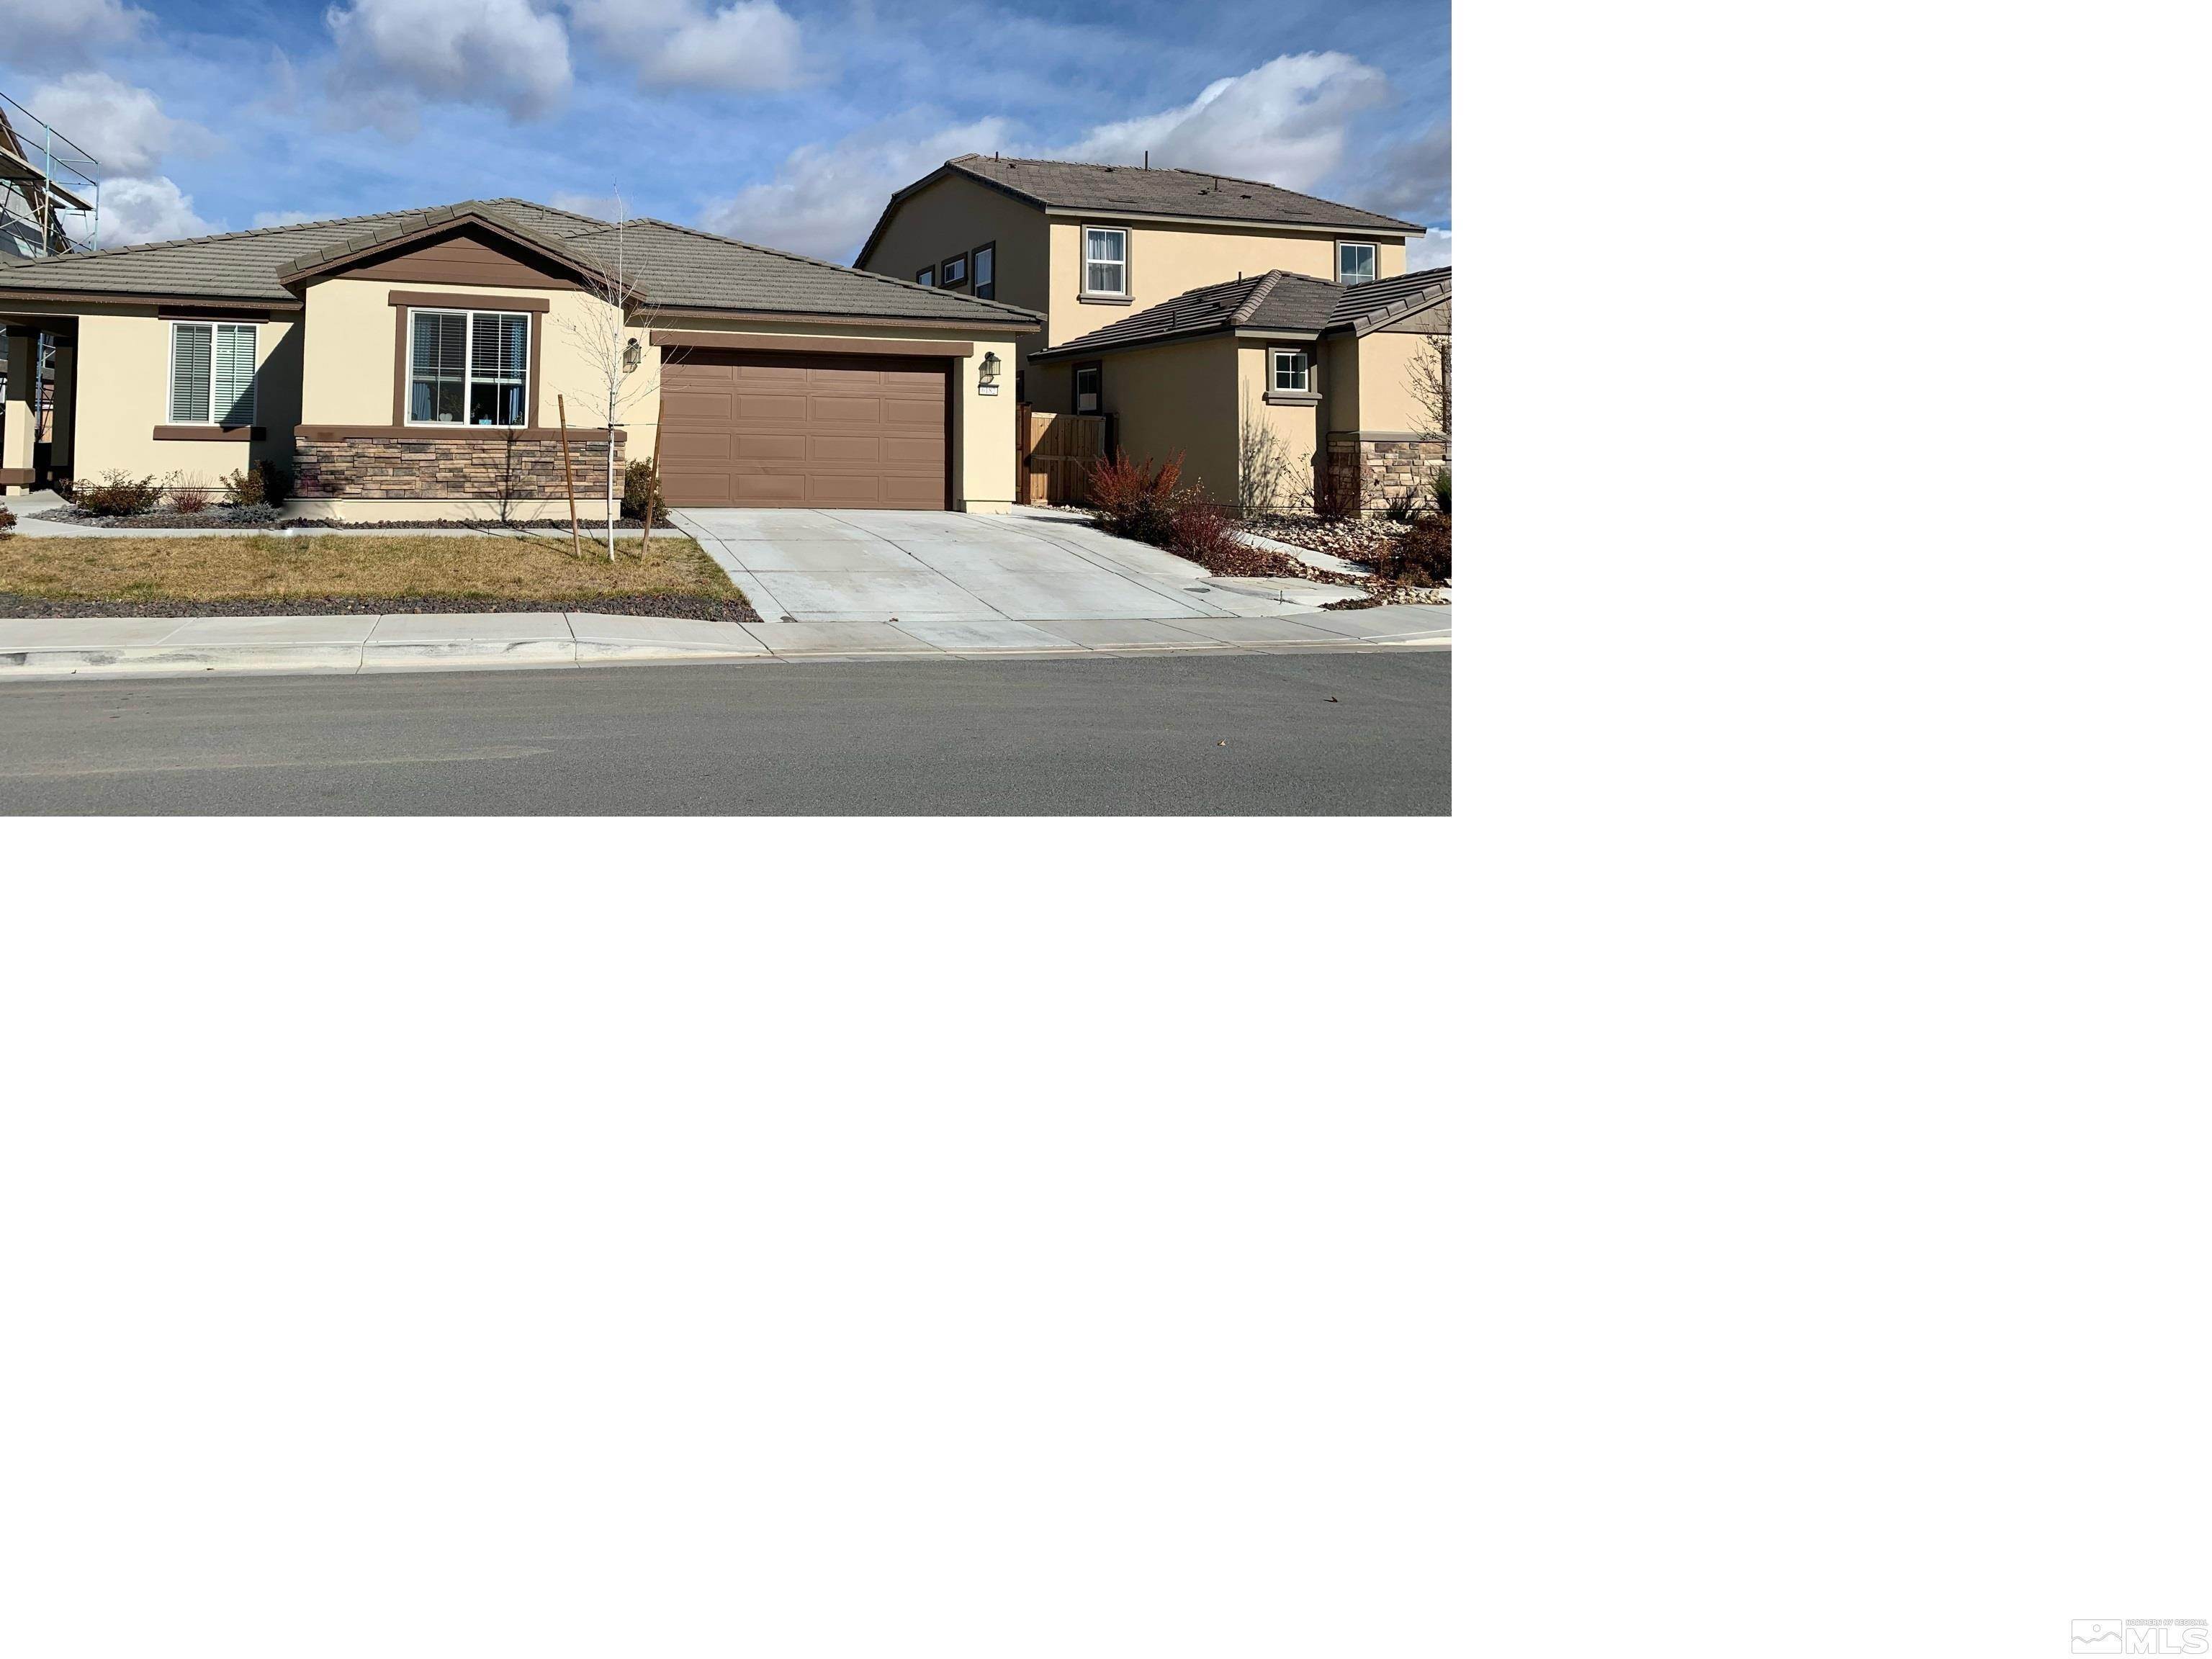 2. Single Family Homes for Active at 6182 Bearcat Sparks, Nevada 89436 United States